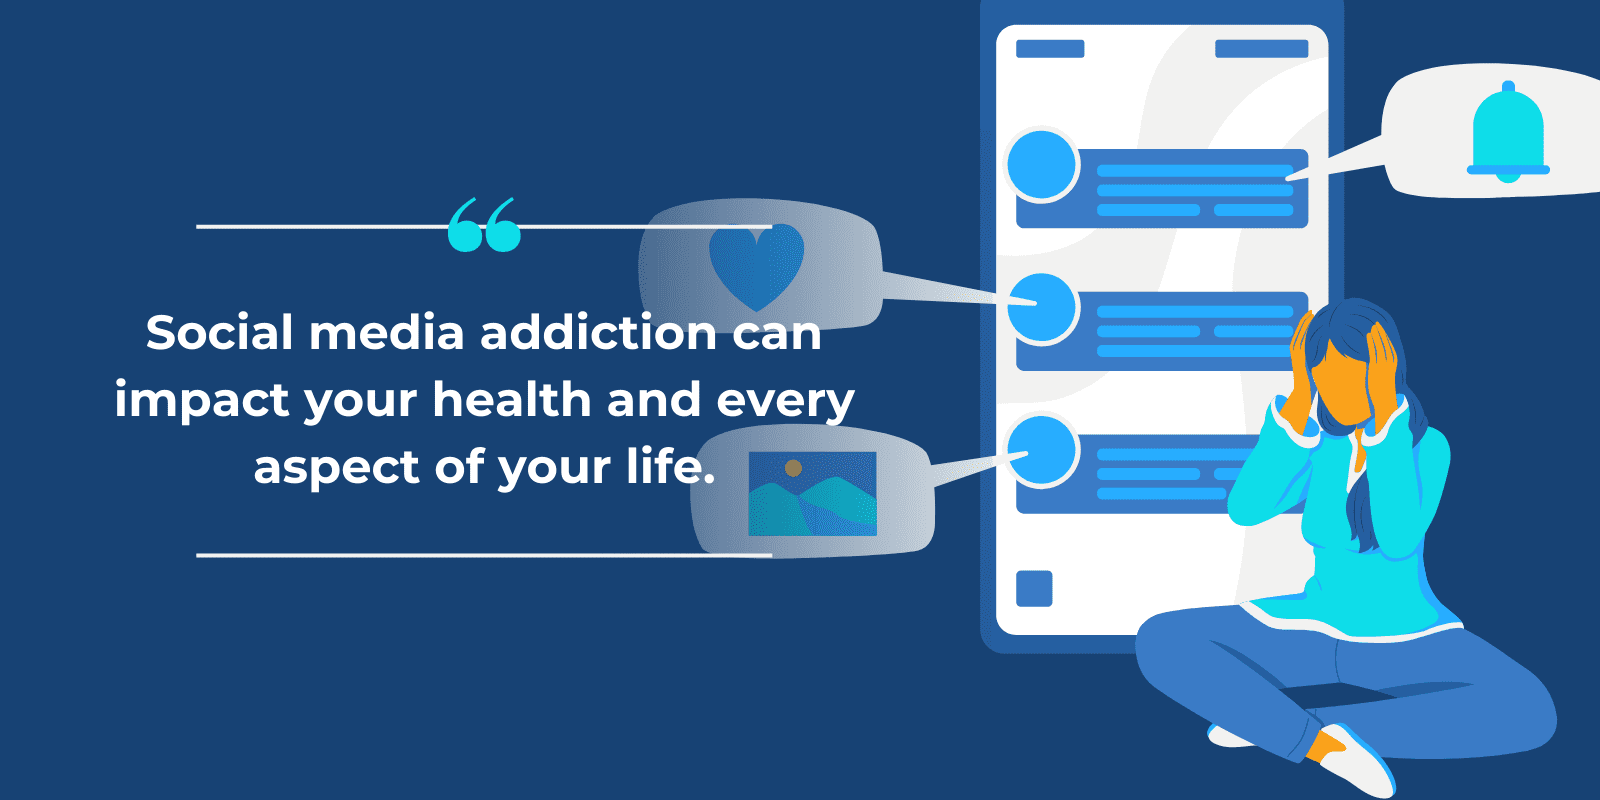 "Social media addiction can impact your health and every aspect of your life." written on top of a digital graphic of a woman figure looking stressed in front of a smartphone filled with social media notifications